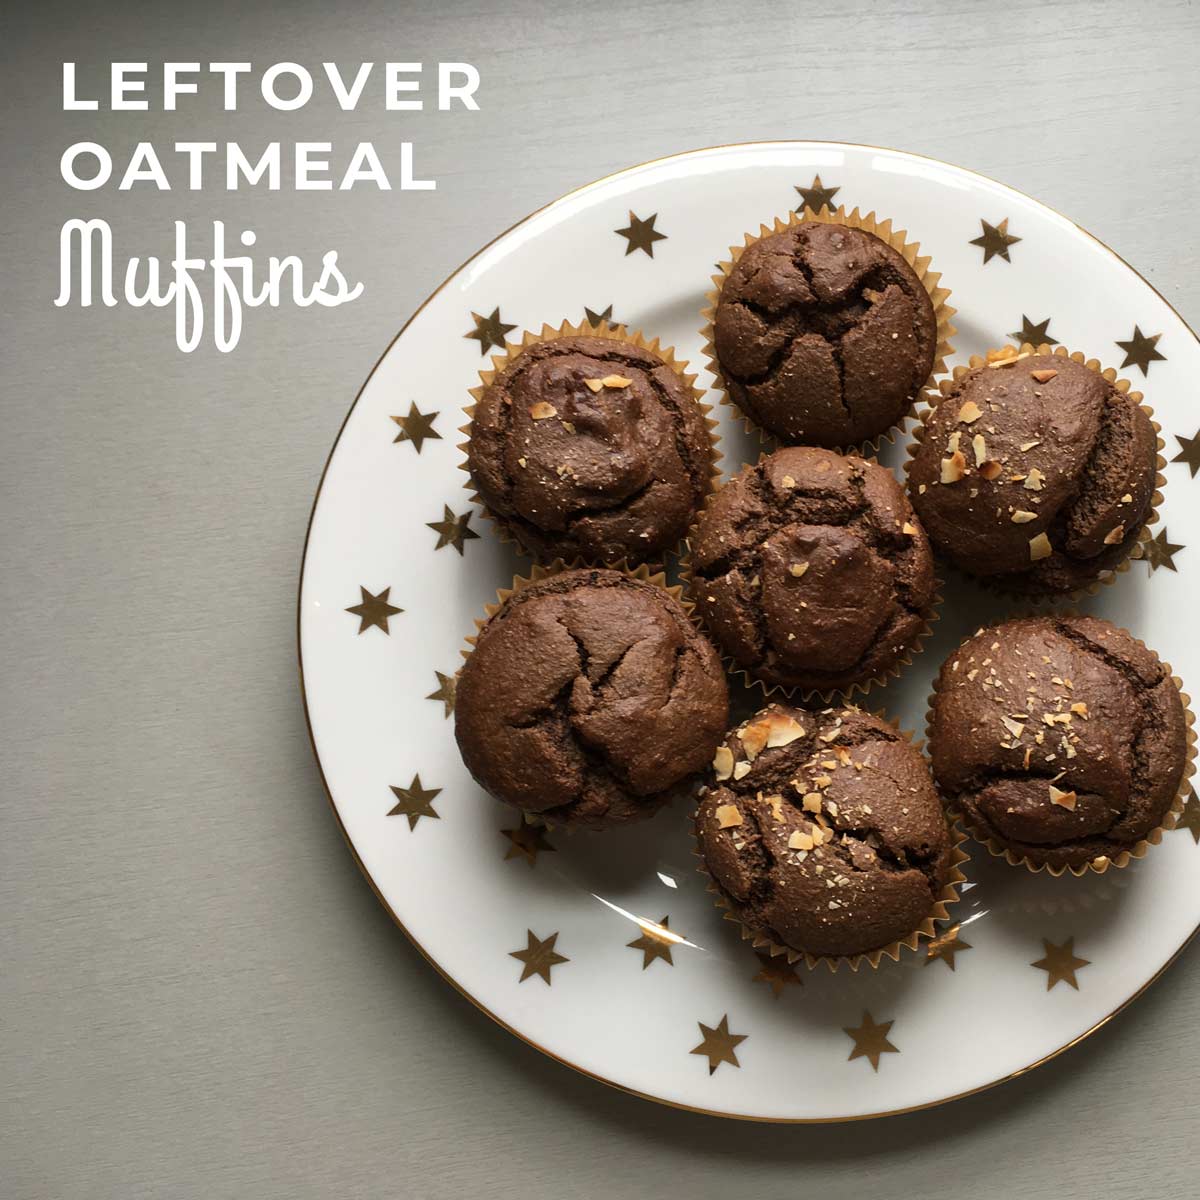 Leftover Oatmeal Muffins (Gluten-free, Sugar-free and Chocolate-ee)